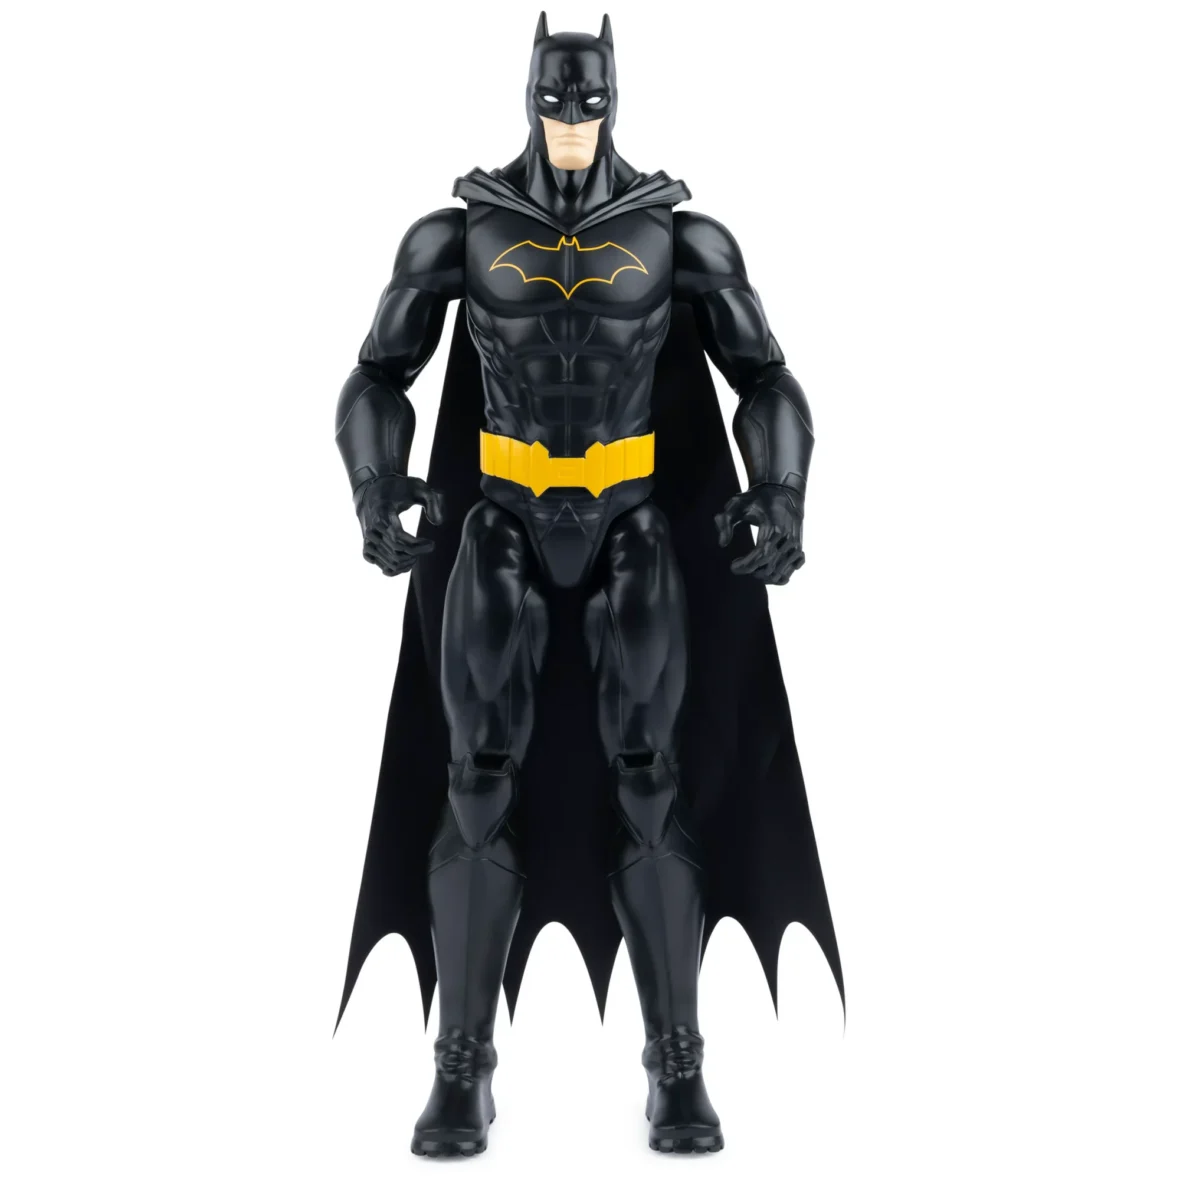 DC Comics Batman – All Black 12-inch Rebirth Action Figure, Kids Toys for Boys Aged 3 and up